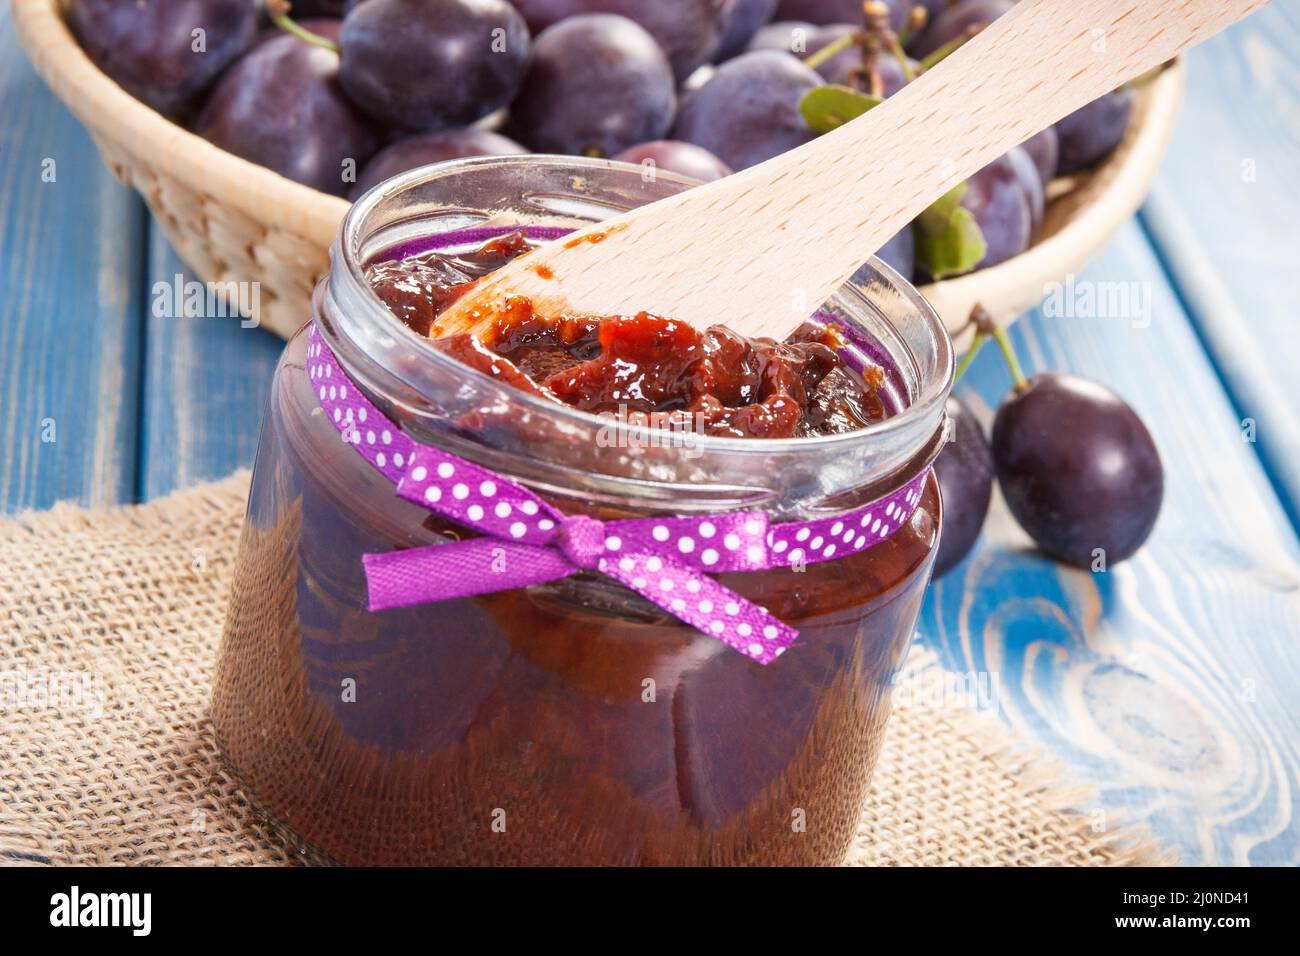 Wooden knife and plum marmalade or jam in glass jar, concept of healthy sweet snack or dessert Stock Photo